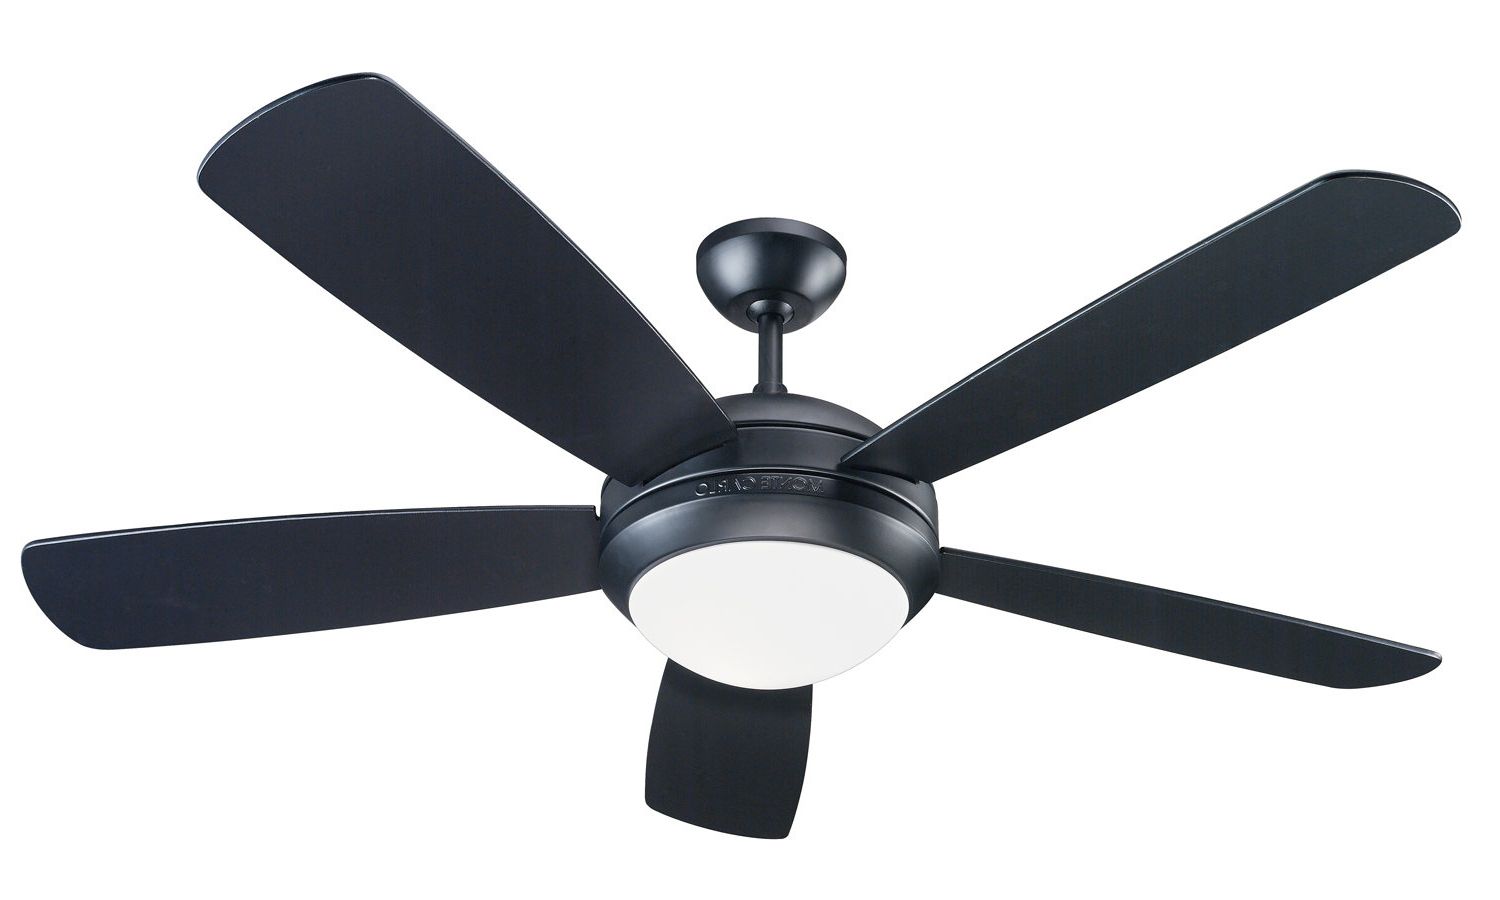 Glenpool 5 Blade Ceiling Fans Intended For Preferred 52" Calkins 5 Blade Ceiling Fan (View 7 of 20)